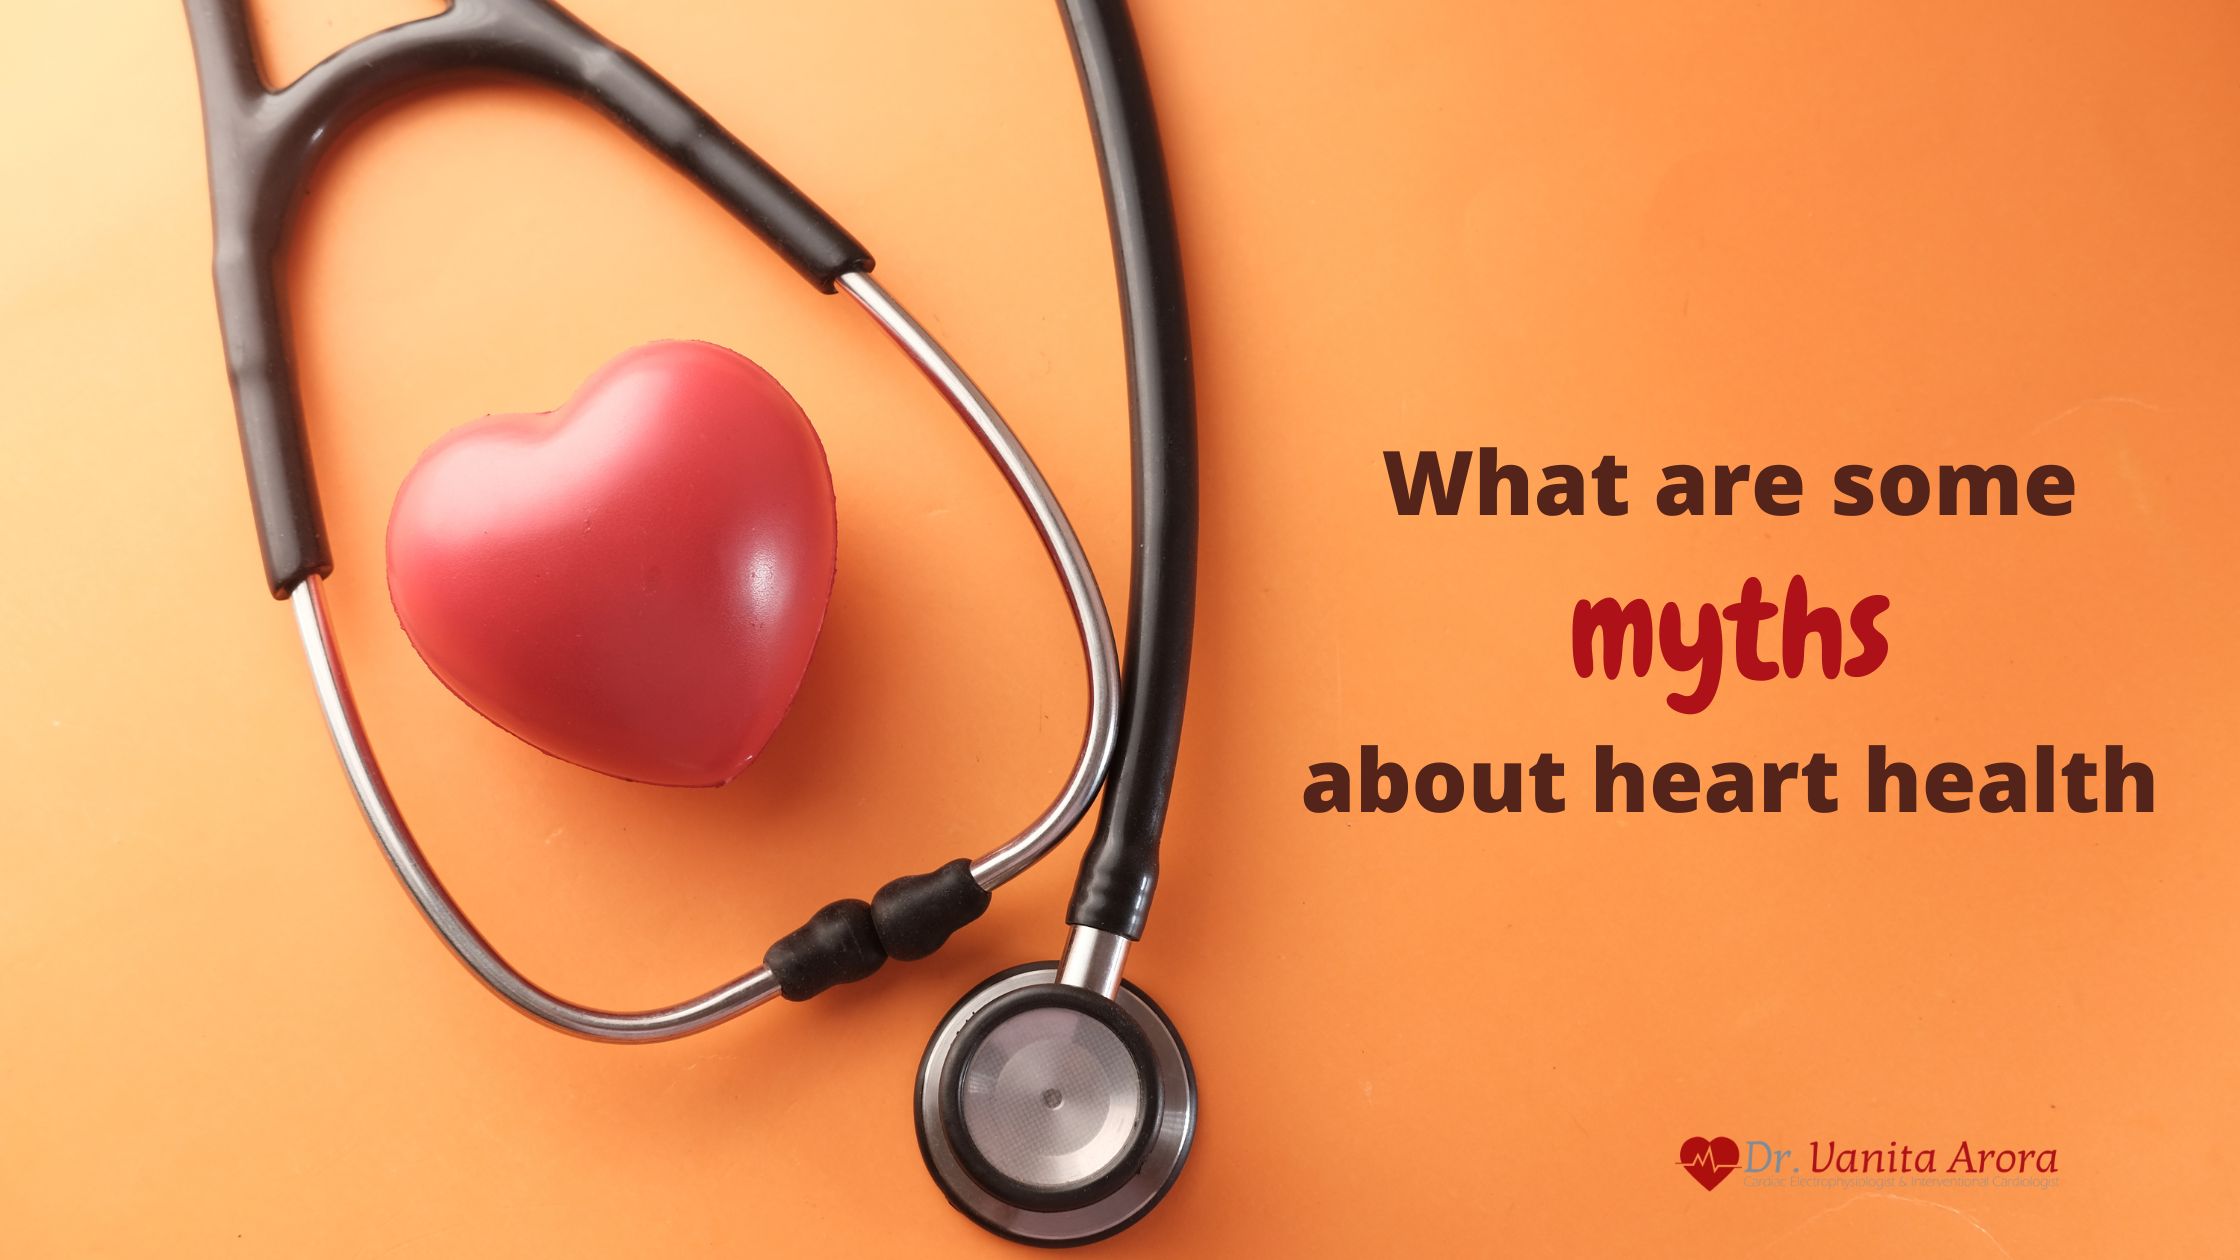 What are some myths about heart health?